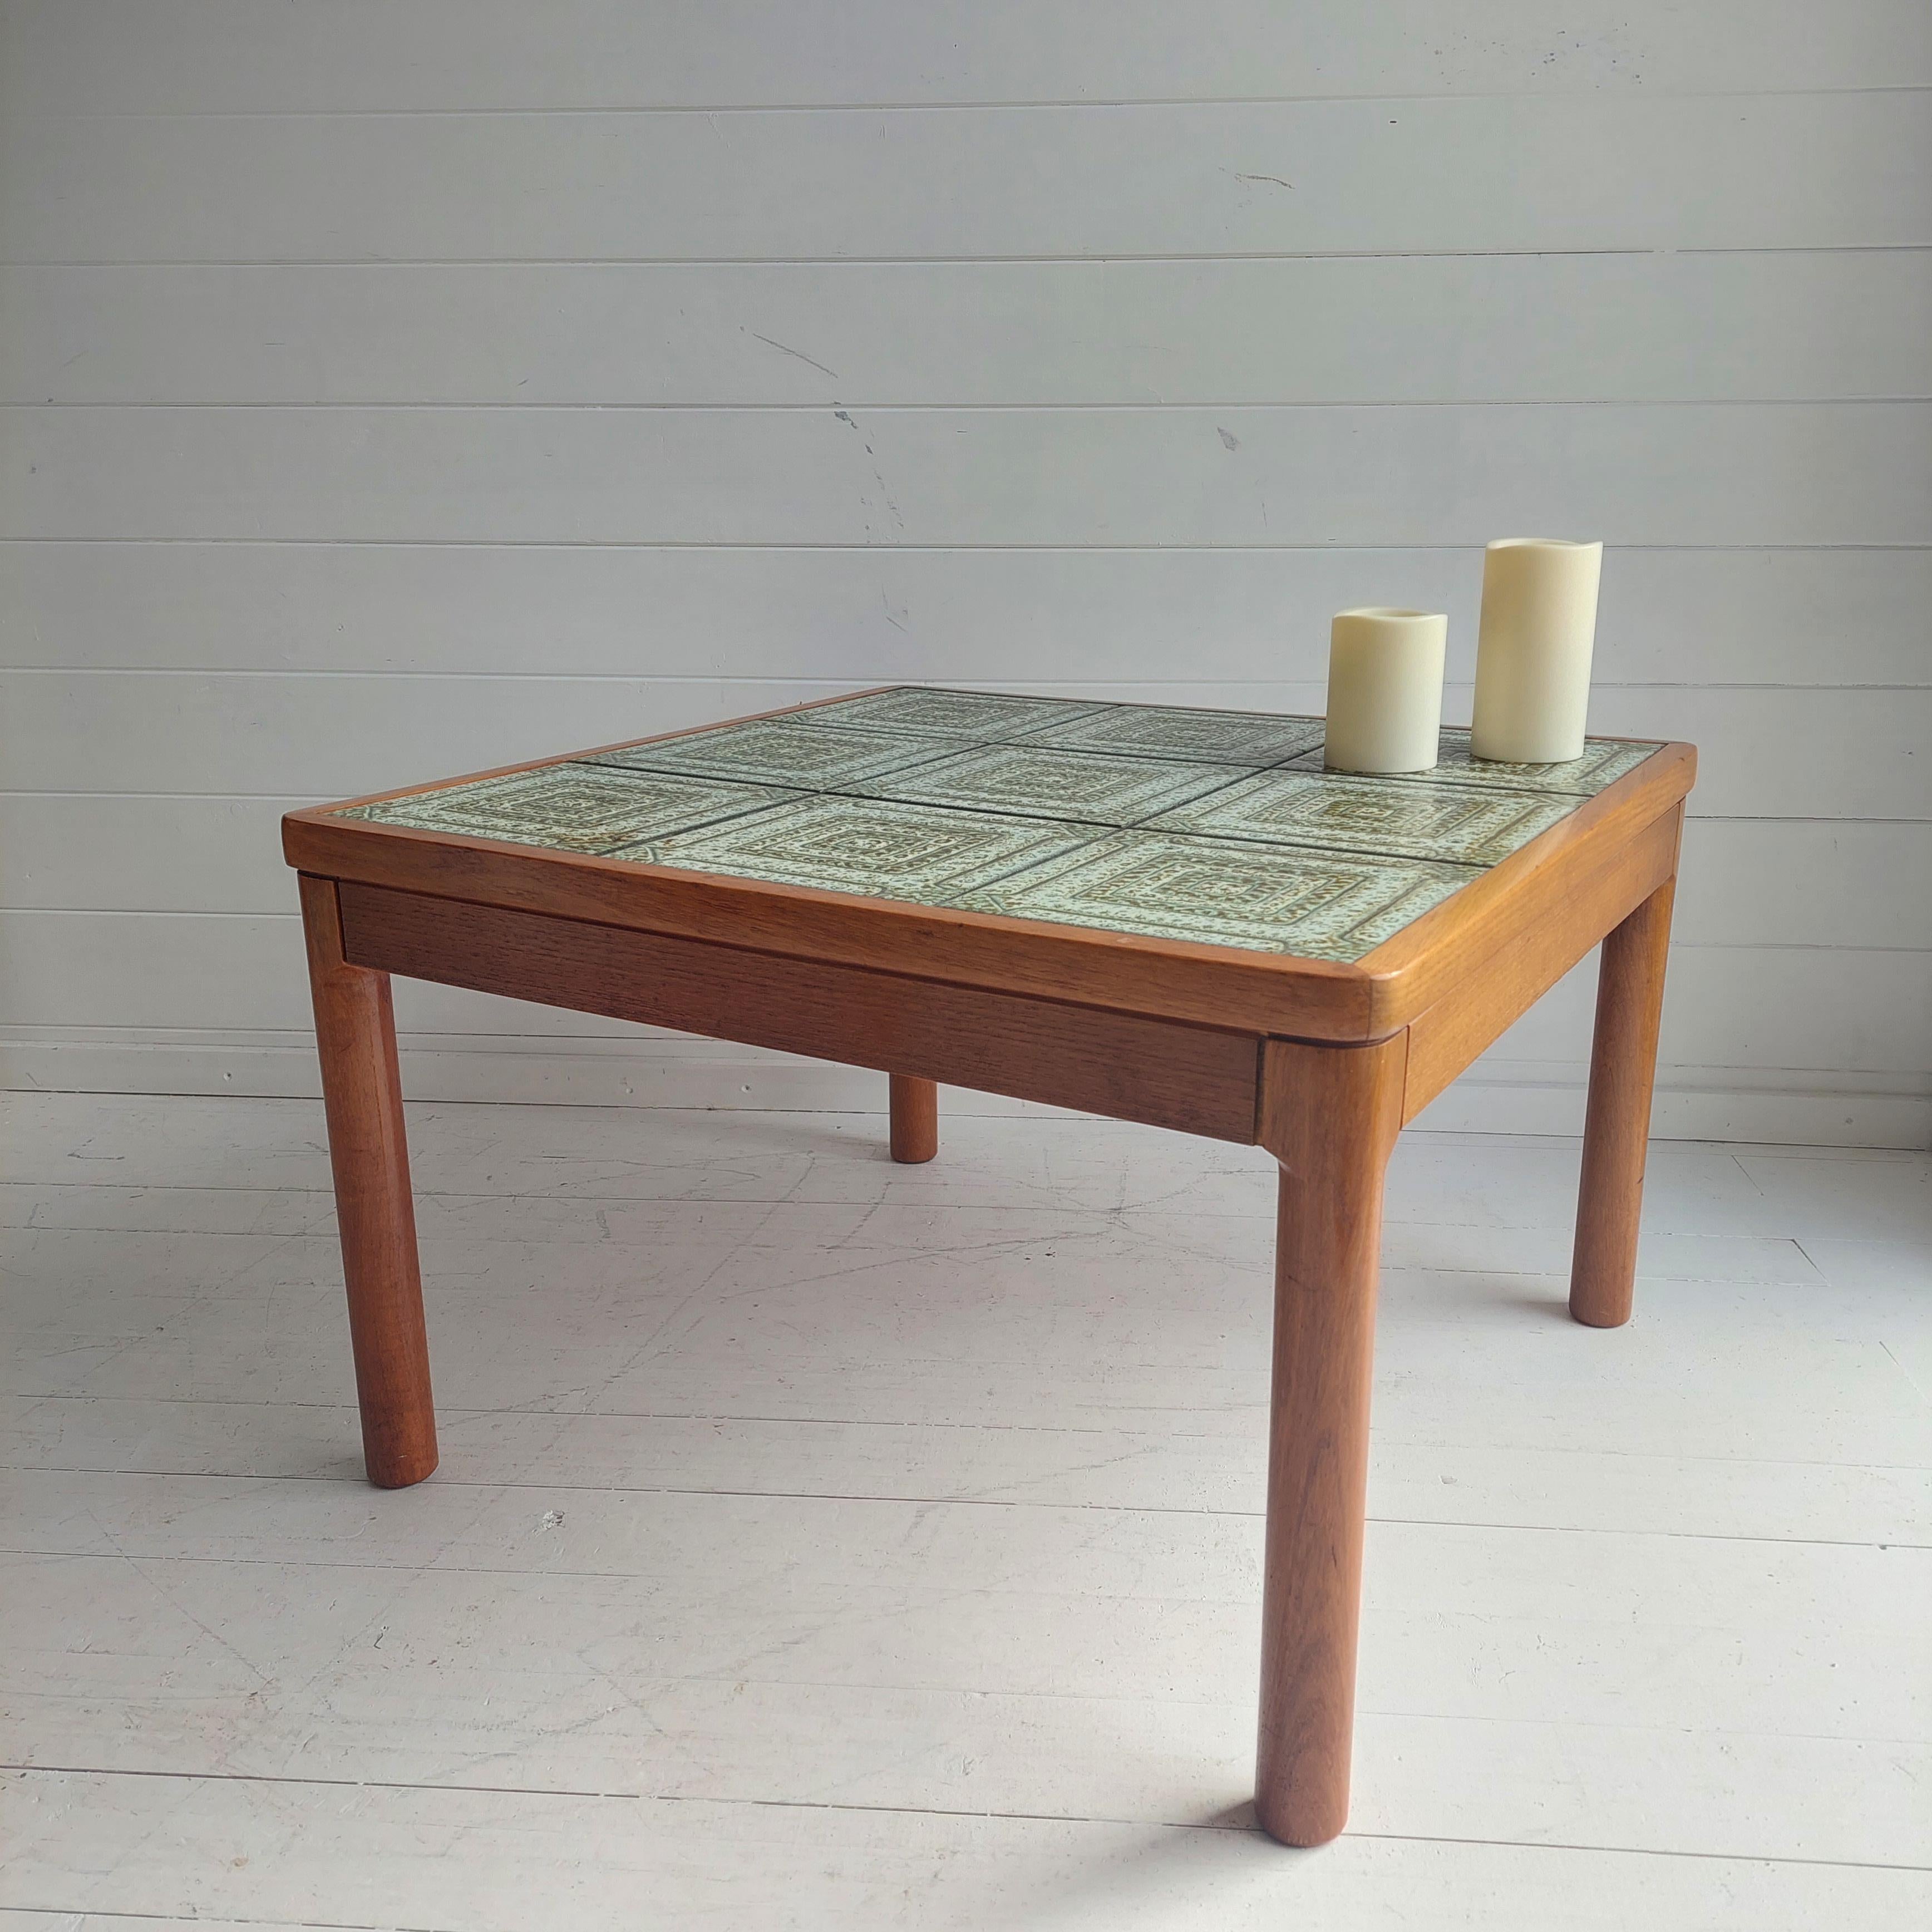 Rare and original Danish coffee table by the renowned brand of Trioh. 
Teak framed table with 9 tiles on its top.

This features stylish set of green patterned tiles and a teak veneer frame and legs. 
Very nice smooth teak grains complemented by